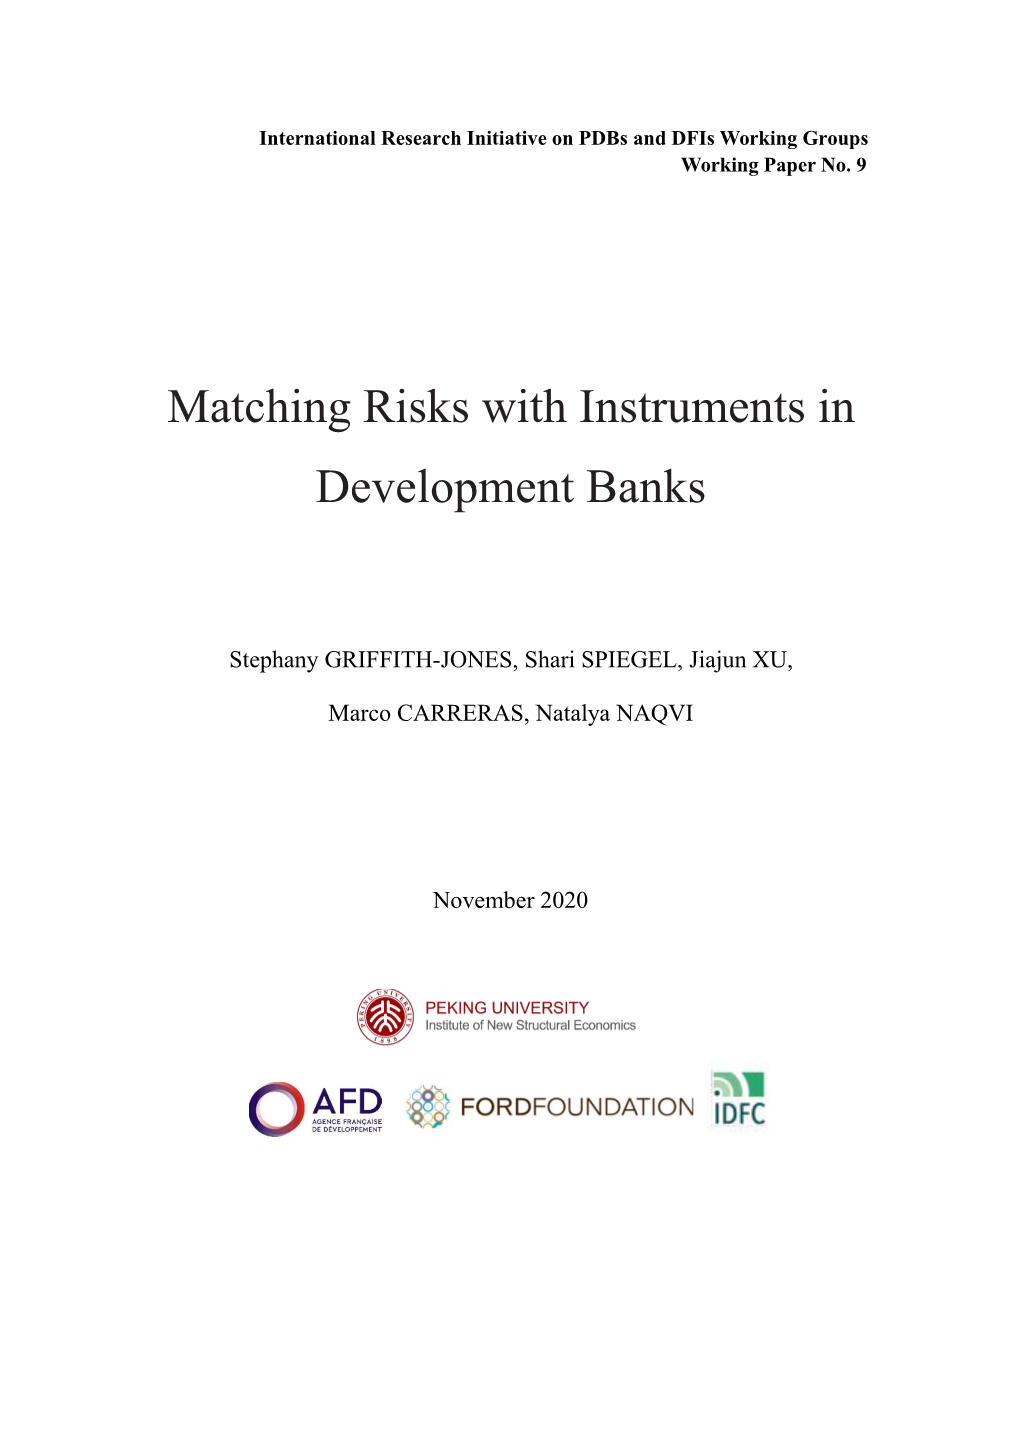 Matching Risks with Instruments in Development Banks